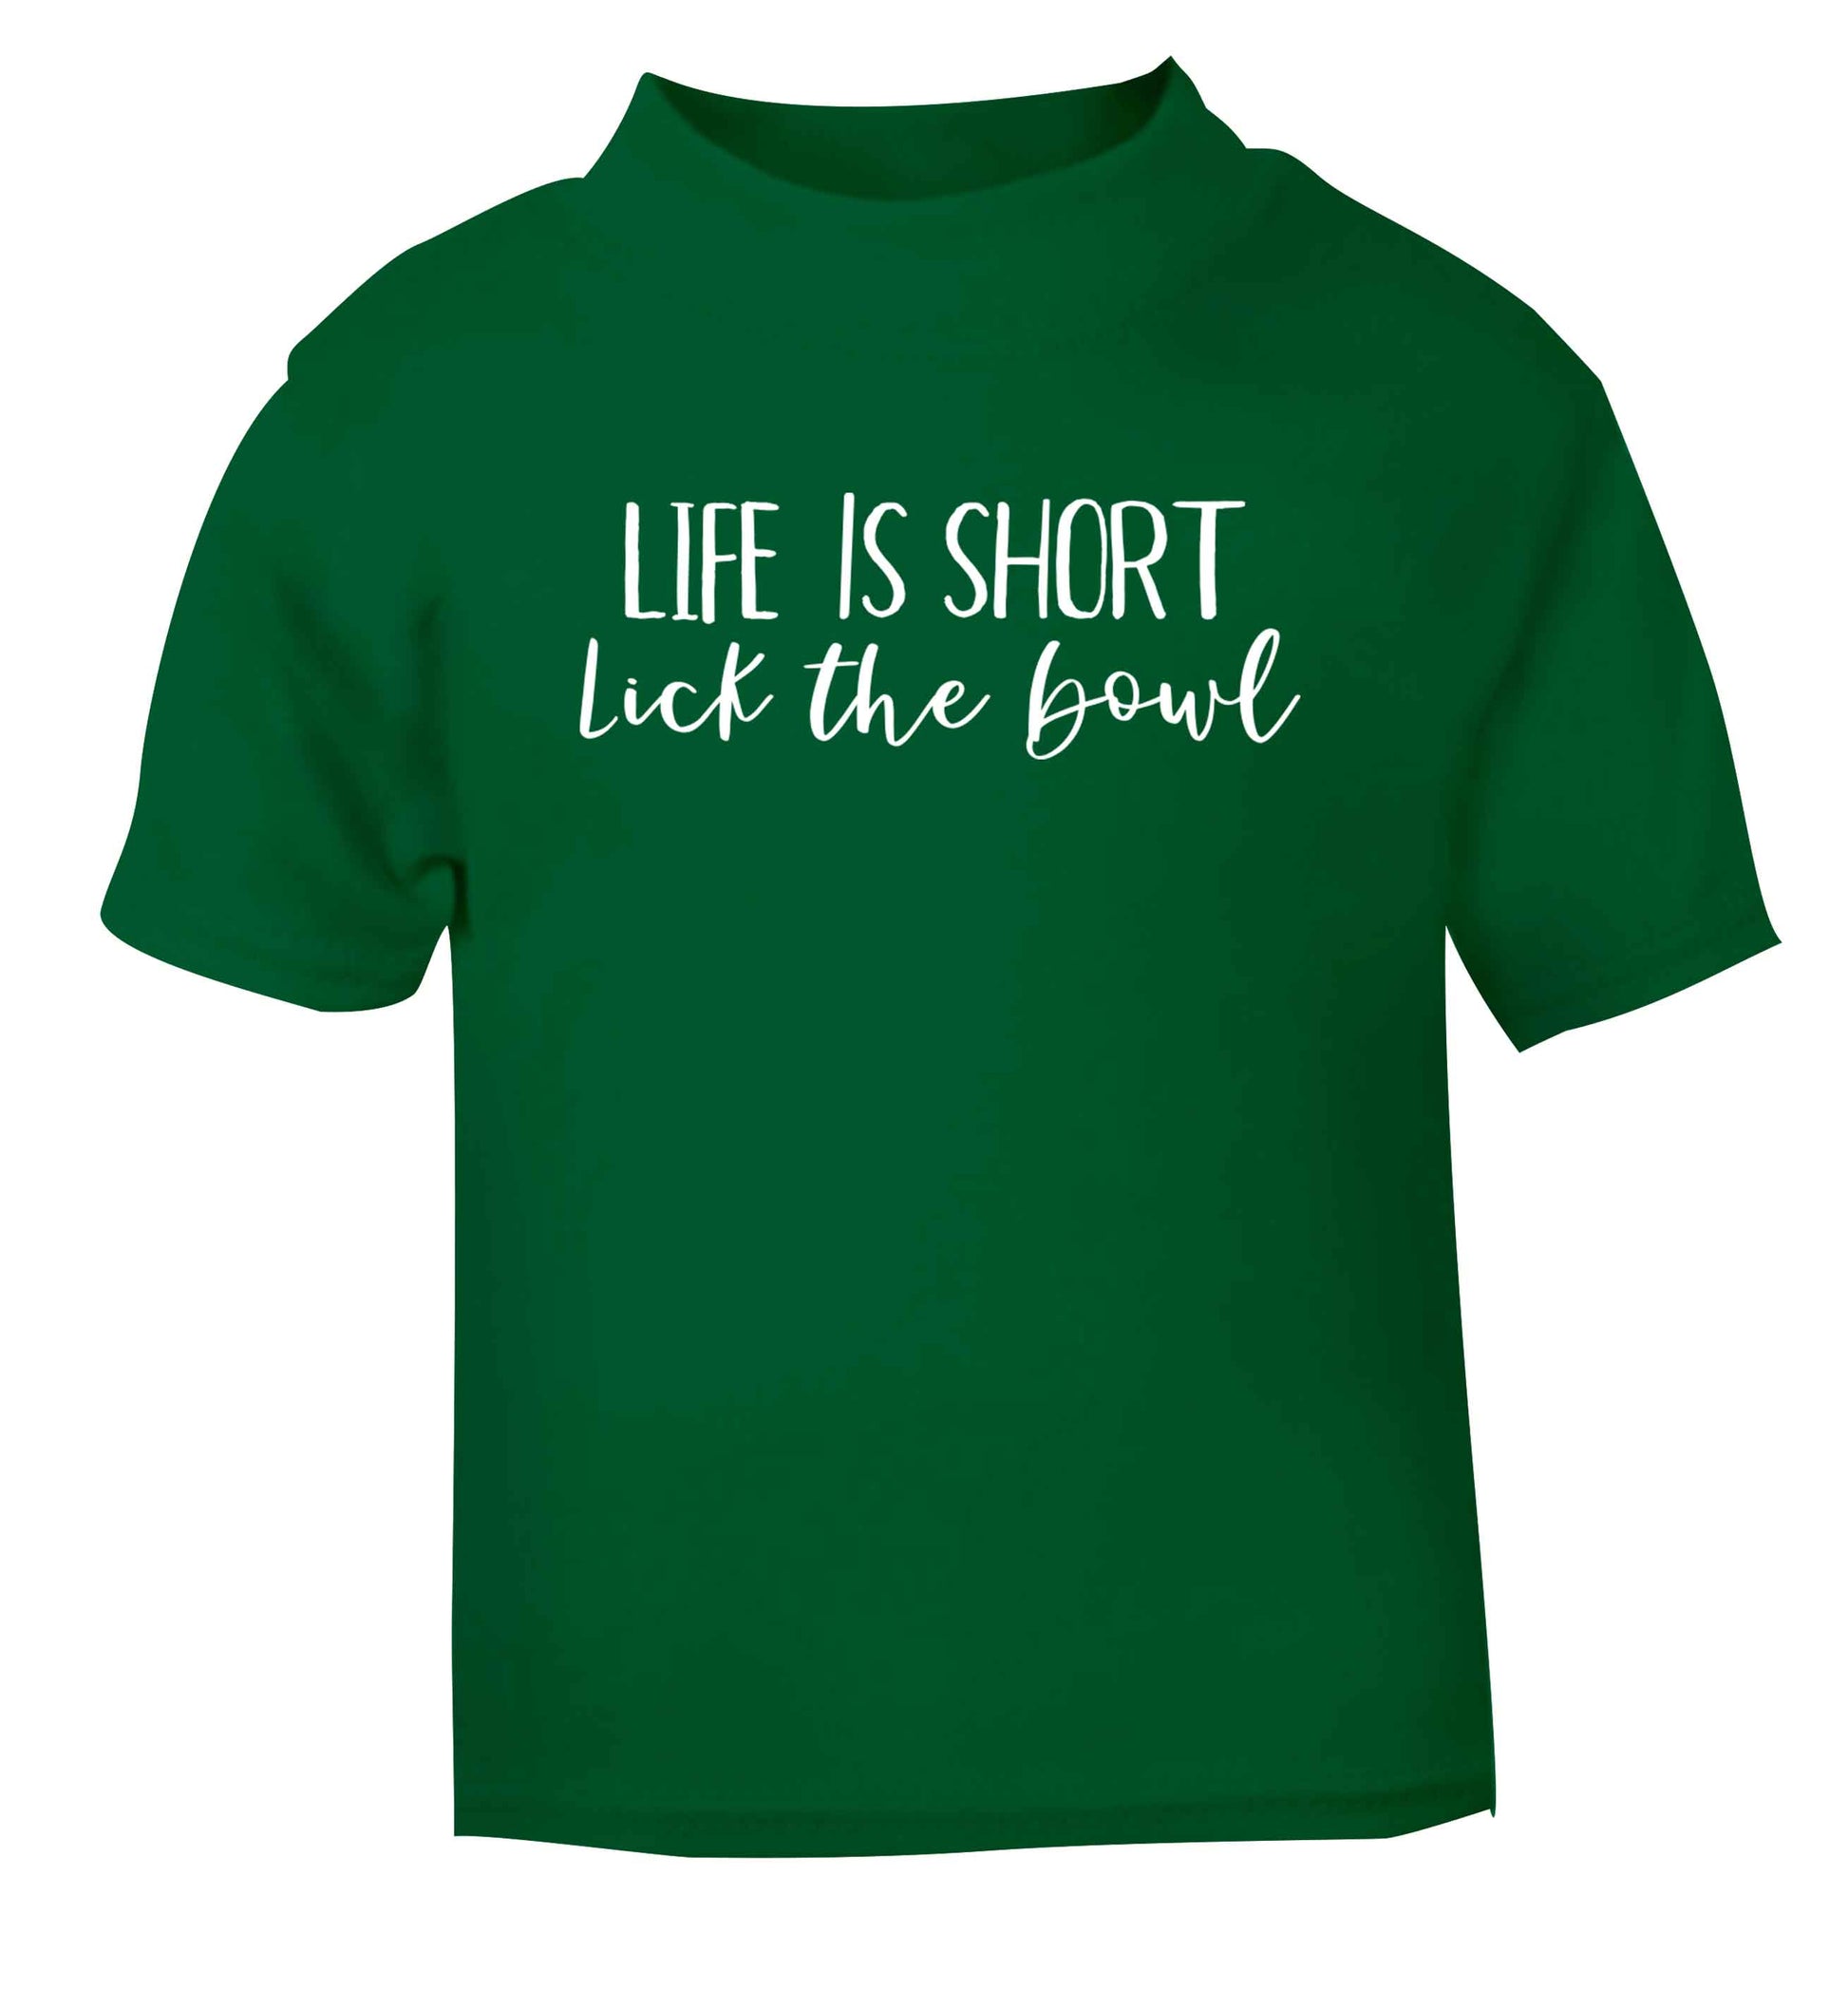 Life is short lick the bowl green Baby Toddler Tshirt 2 Years